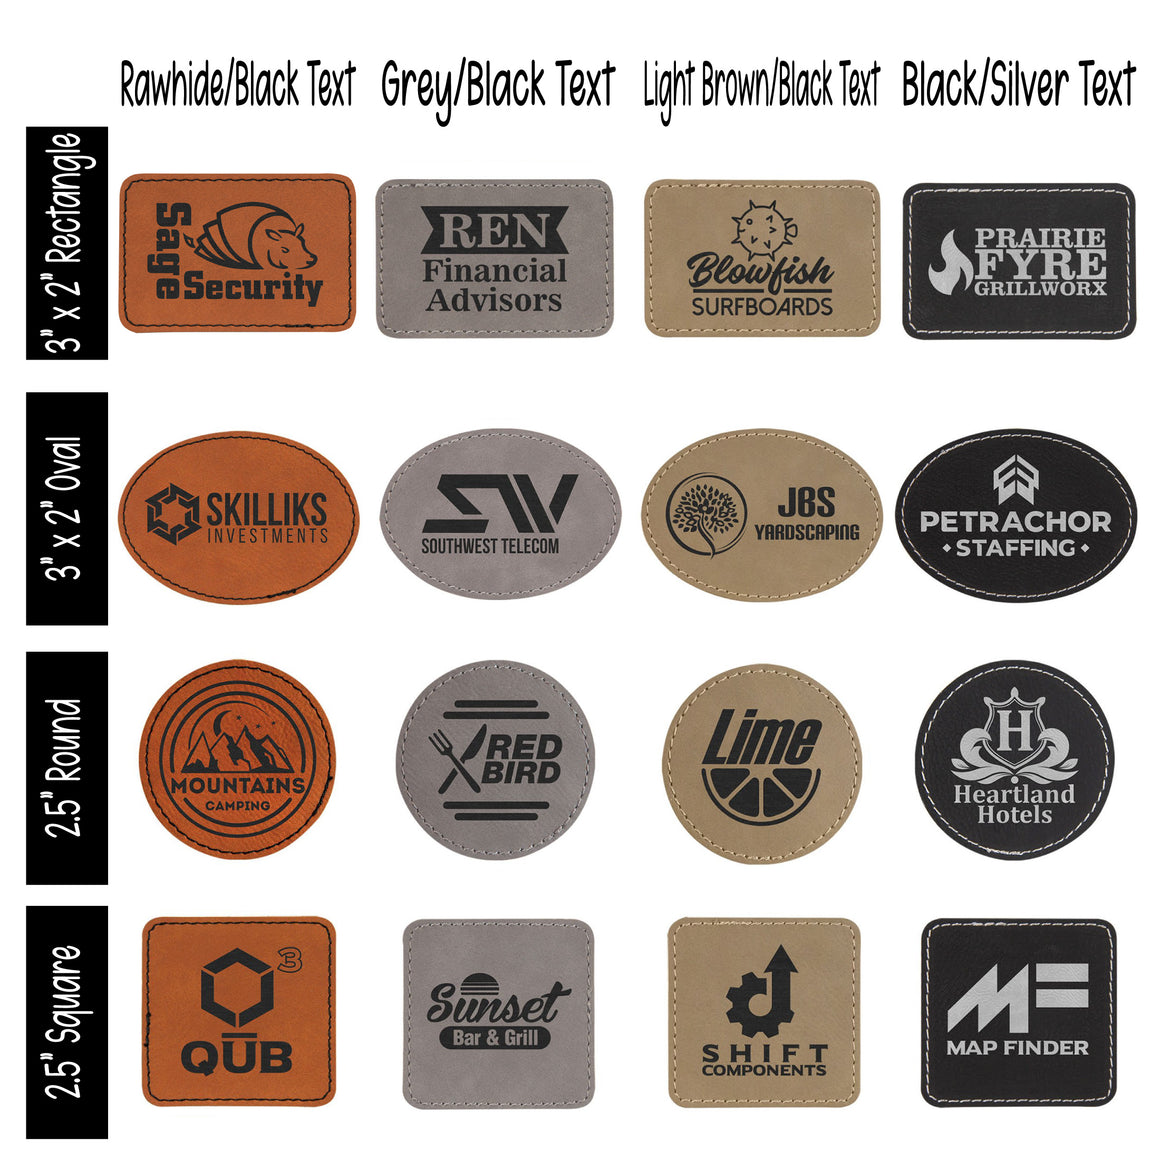 Bulk Custom Engraved Leatherette Patches with Adhesive Backing for Promotional Items and Business Branding